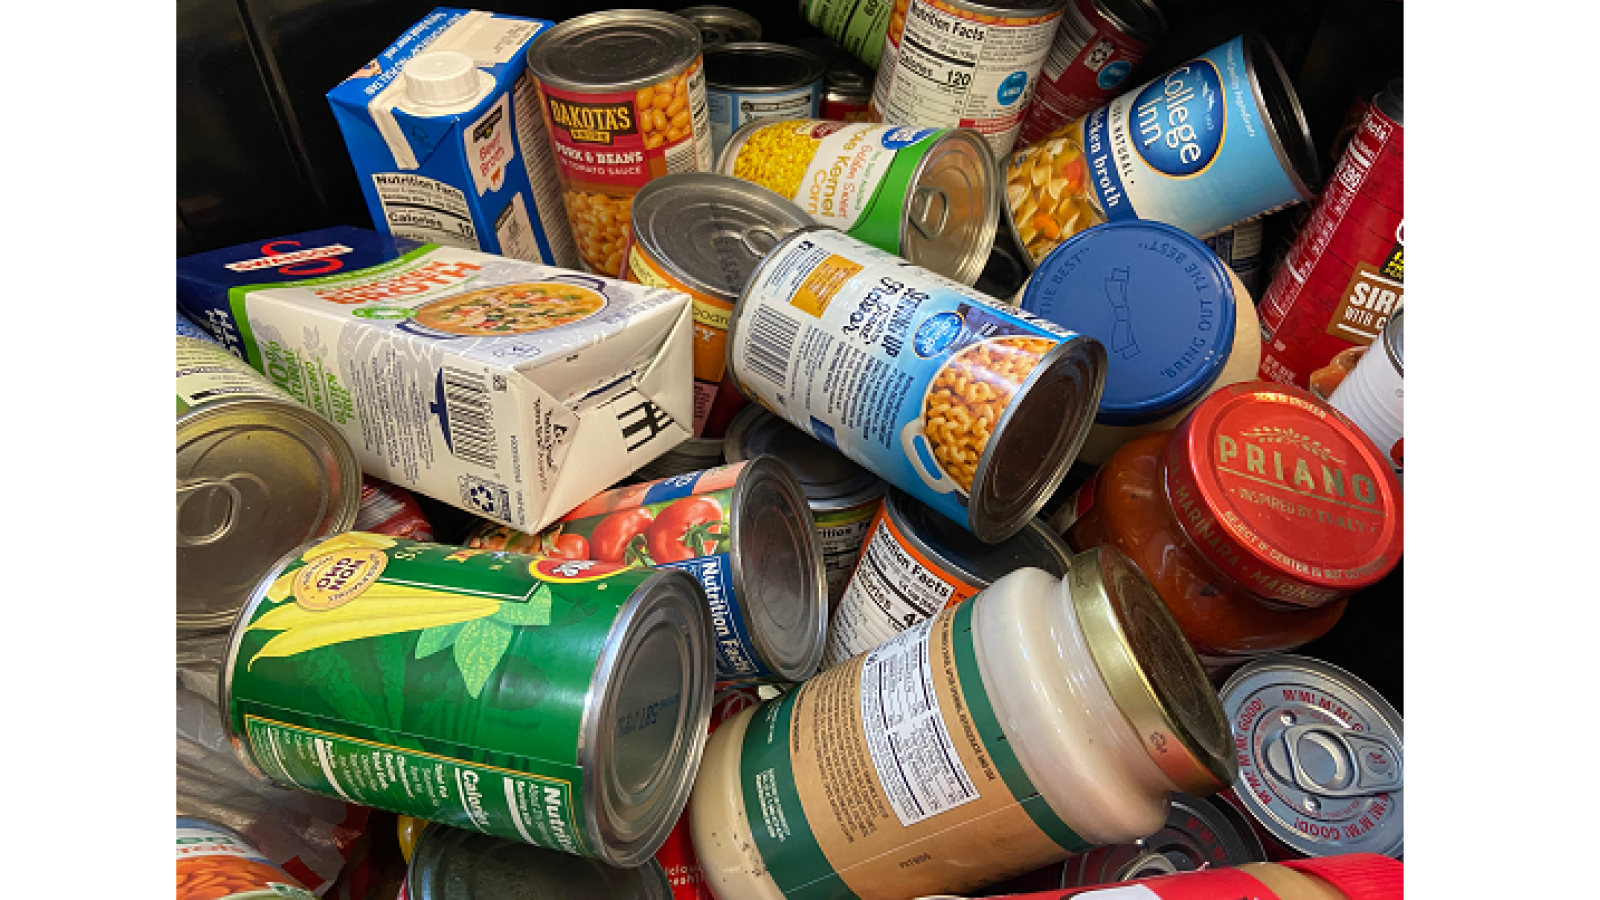 Guthrie Cortland Medical Center Hosts Community Food Drive to Fight Food Insecurity